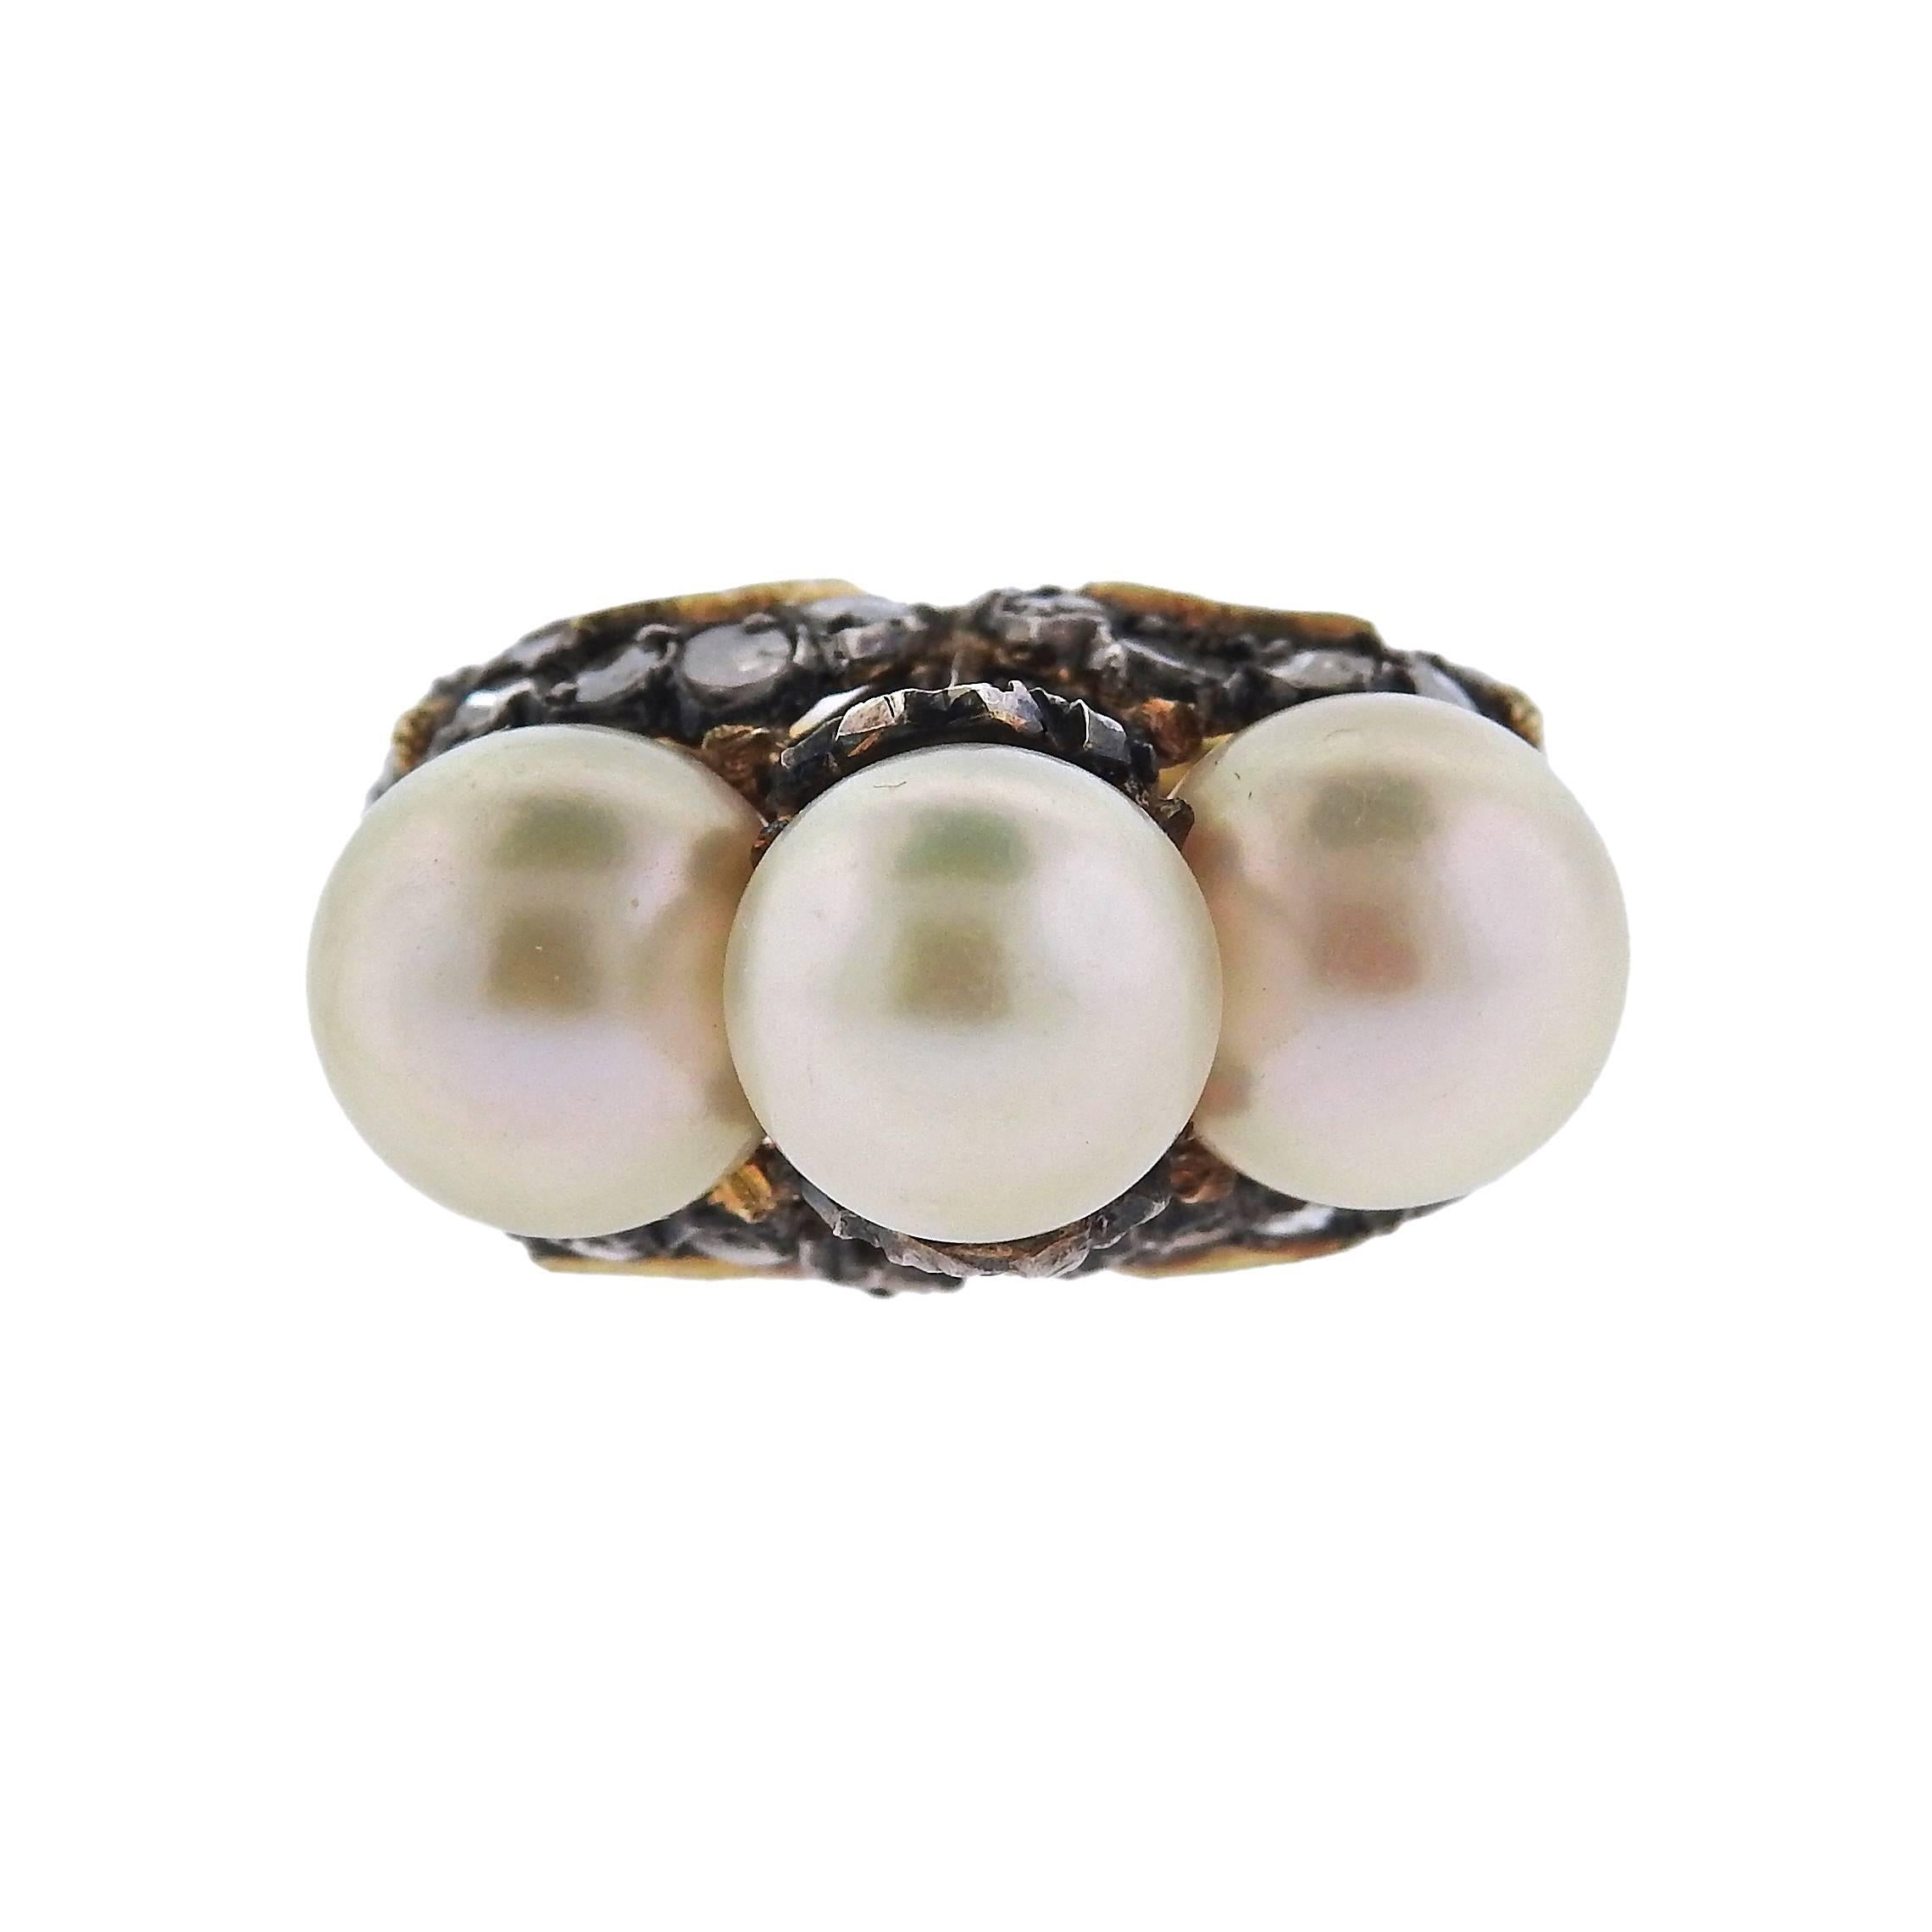 18k gold and silver ring crafted by Buccellati featuring a pearls ranging from 9 to 9.5mm in diameter and rose cut diamonds. Ring is a size 6, ring top is 13mm x 25mm. Ring sits approximately 19mm from finger. Marked T2631, Ialy, 18k, Buccellati .